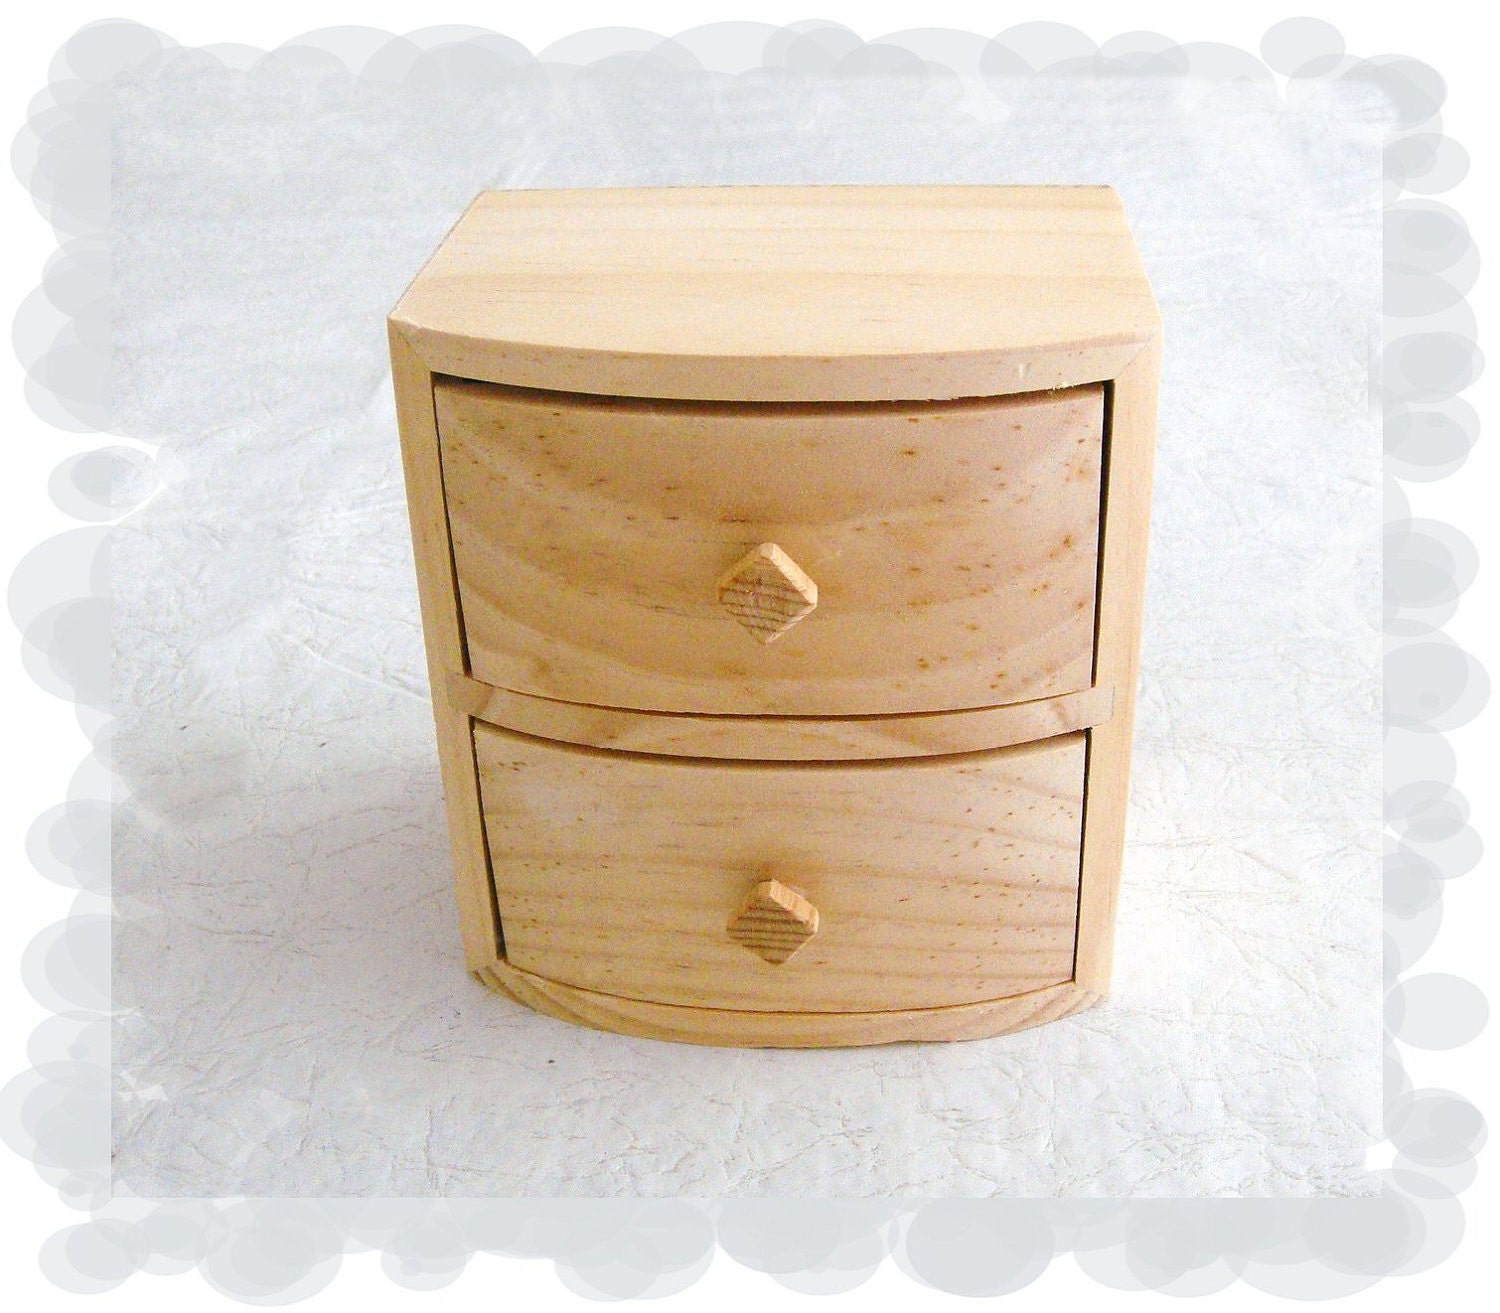 Handmade Wooden Box with Drawers Unfinished